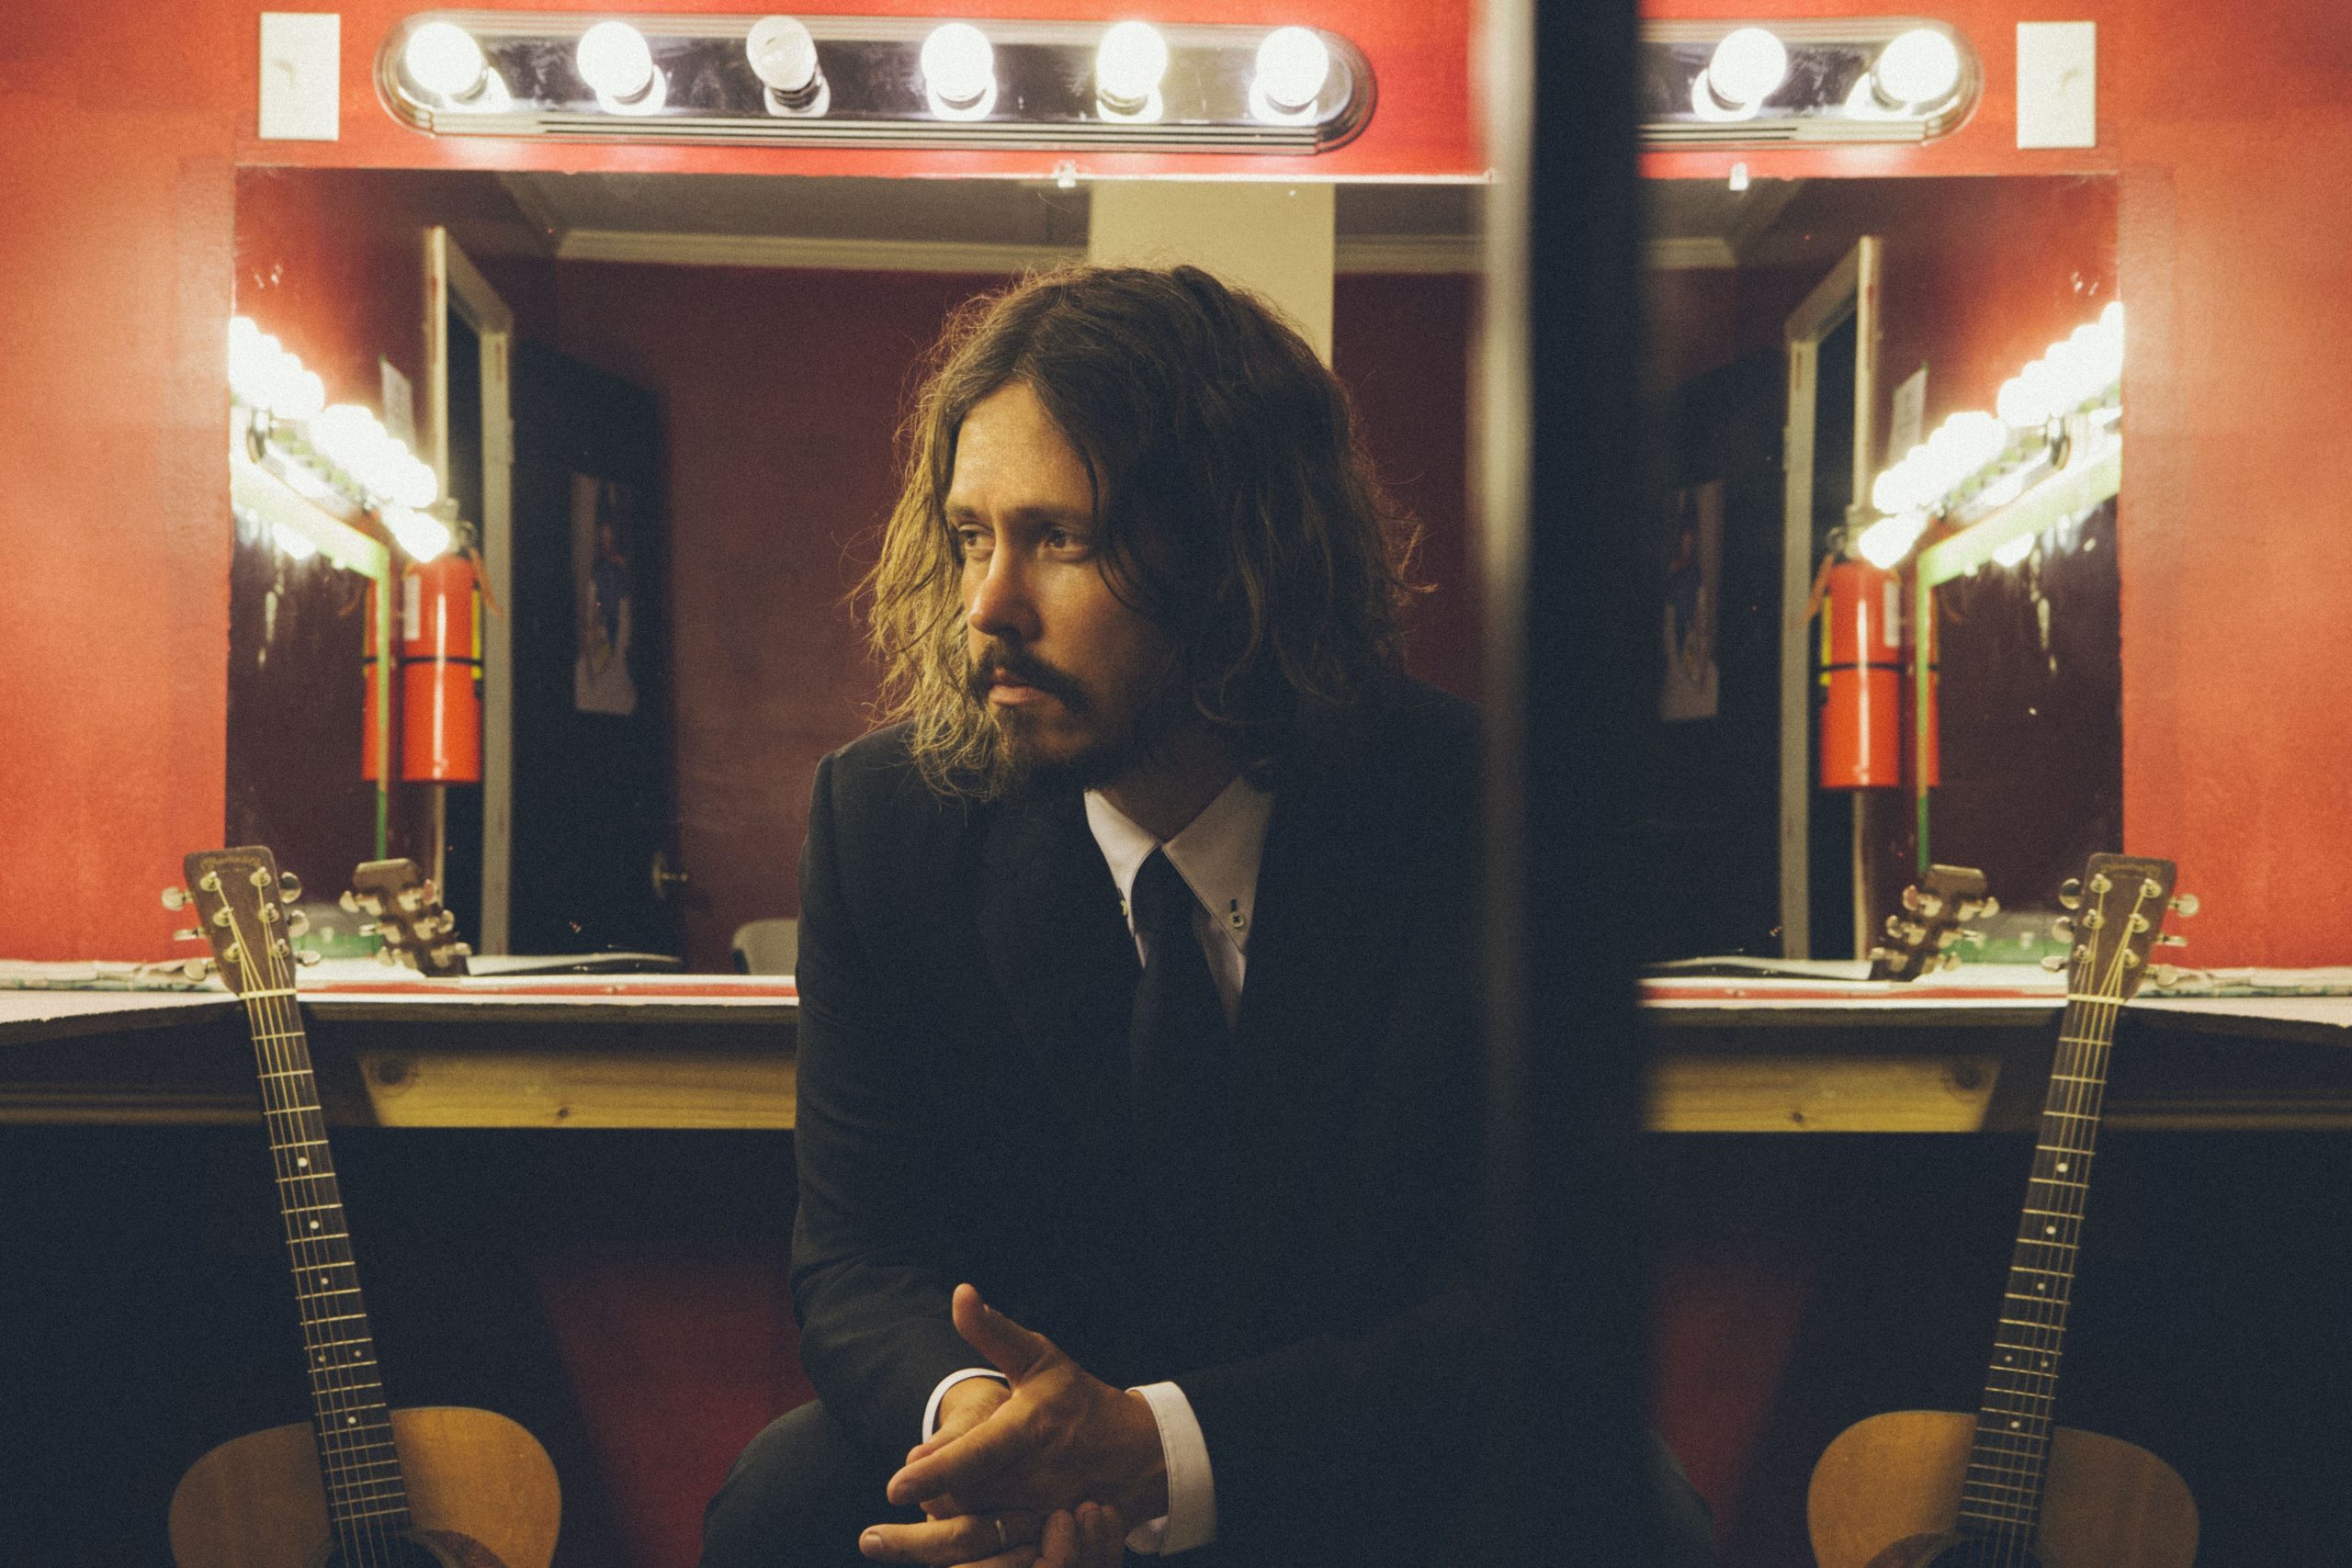 John Paul White will perform at the Imogene Theatre. [Special to the Press Gazette]